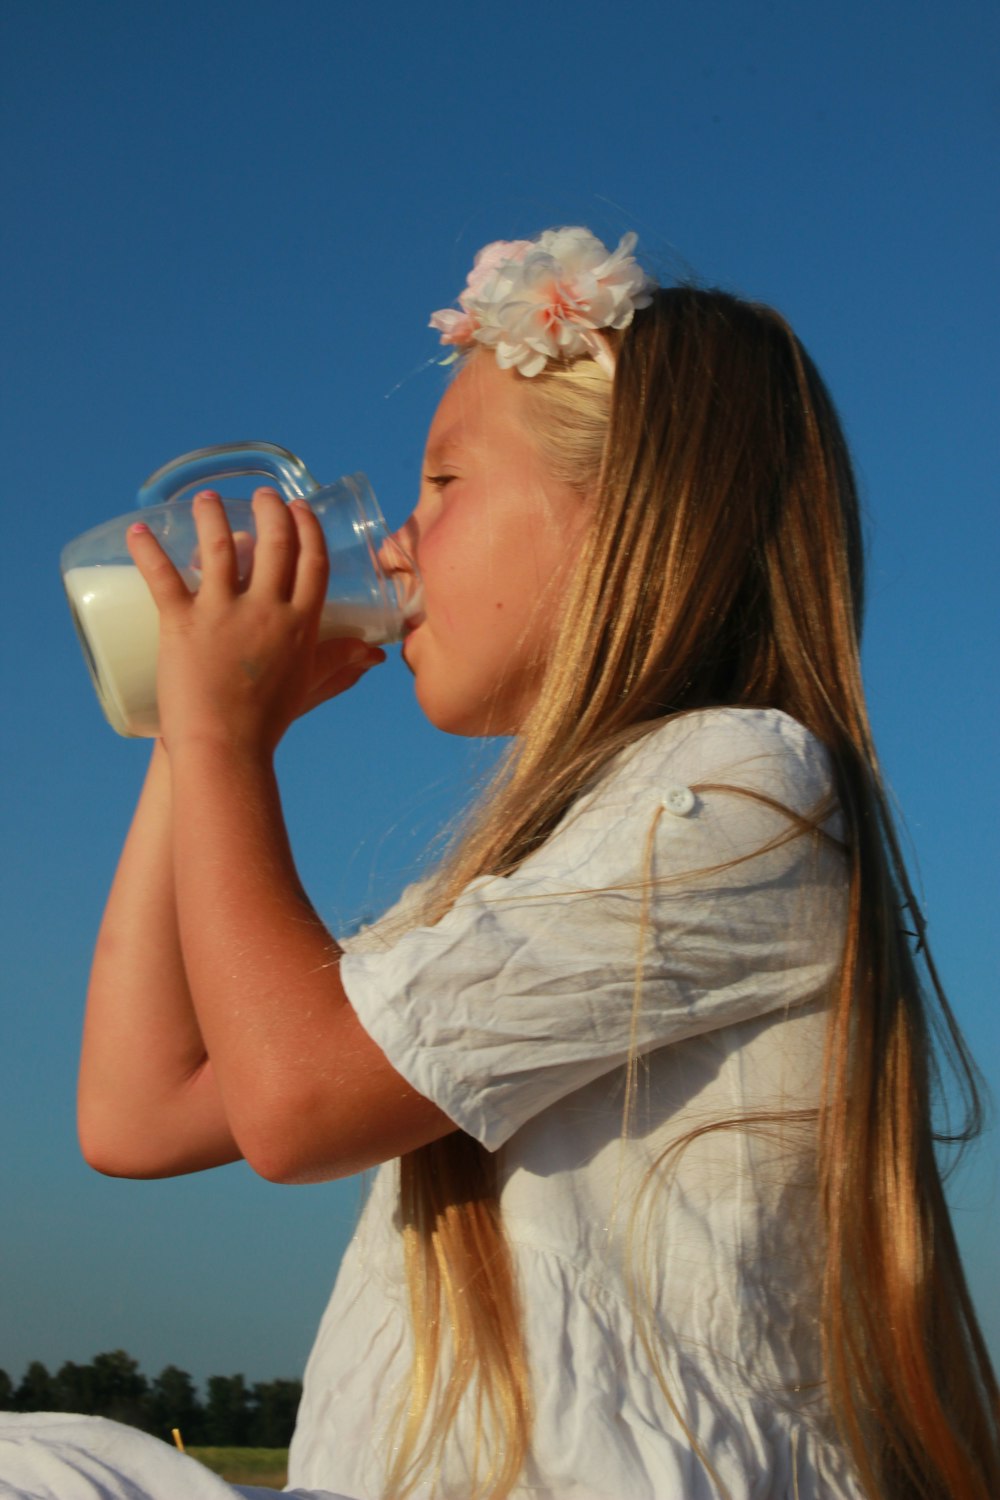 a young girl drinking from a bottle of milk